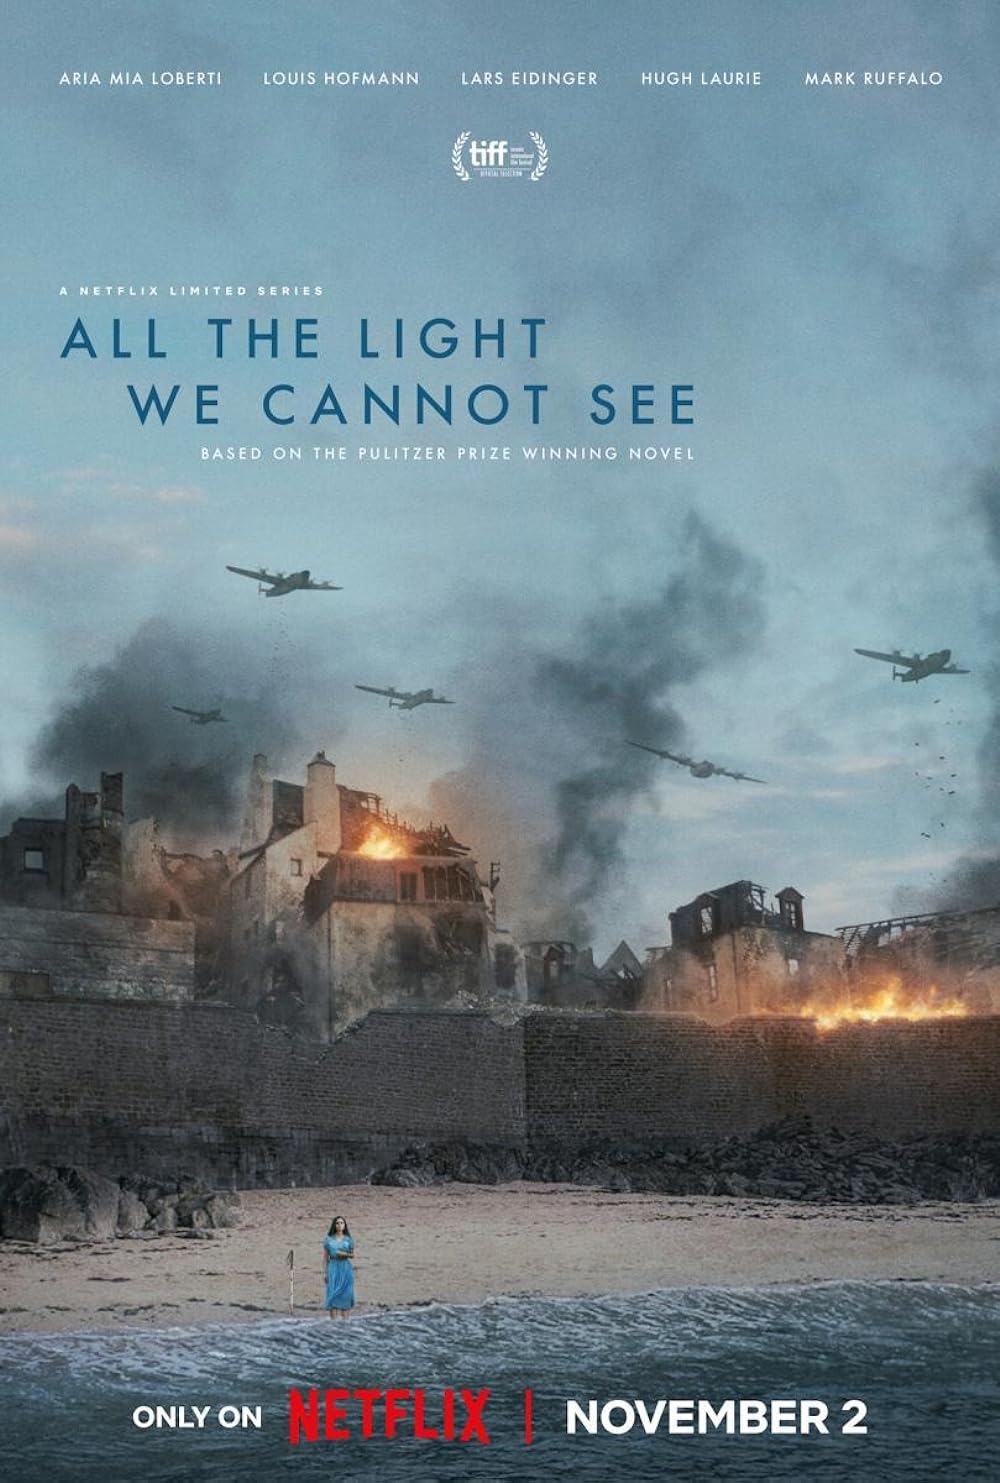 Book to Film Club (All the Light We Cannot See)